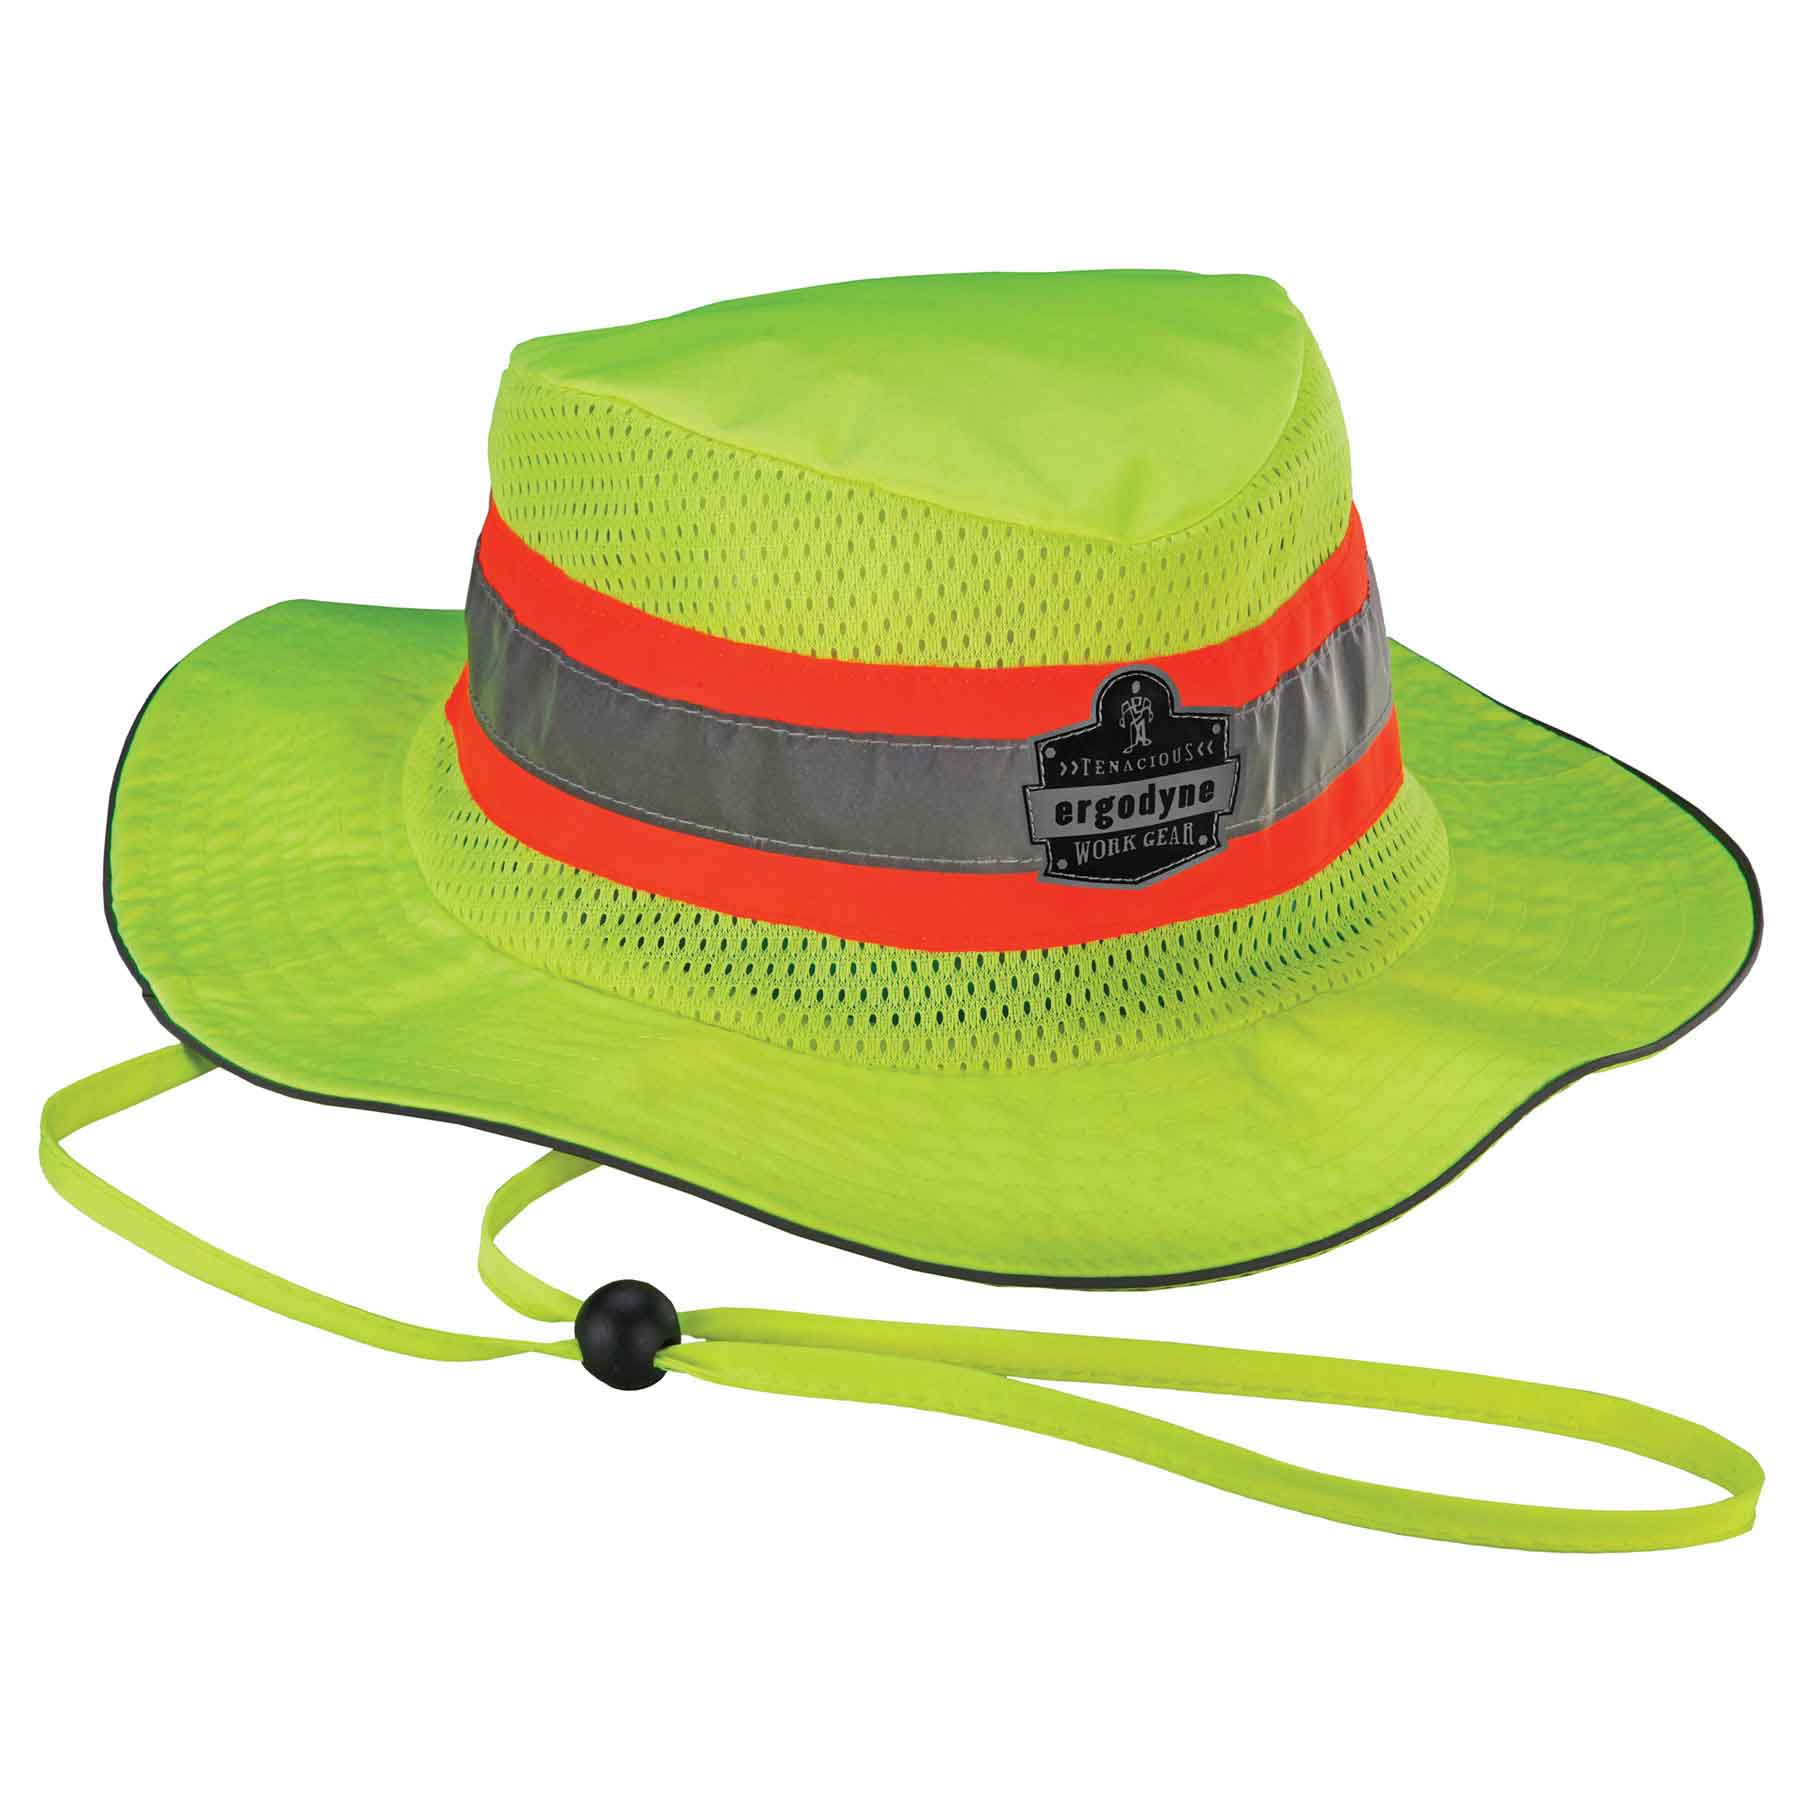 Women's Insulated Adjustable Bucket Hat - Green L/XL Duluth Trading Company